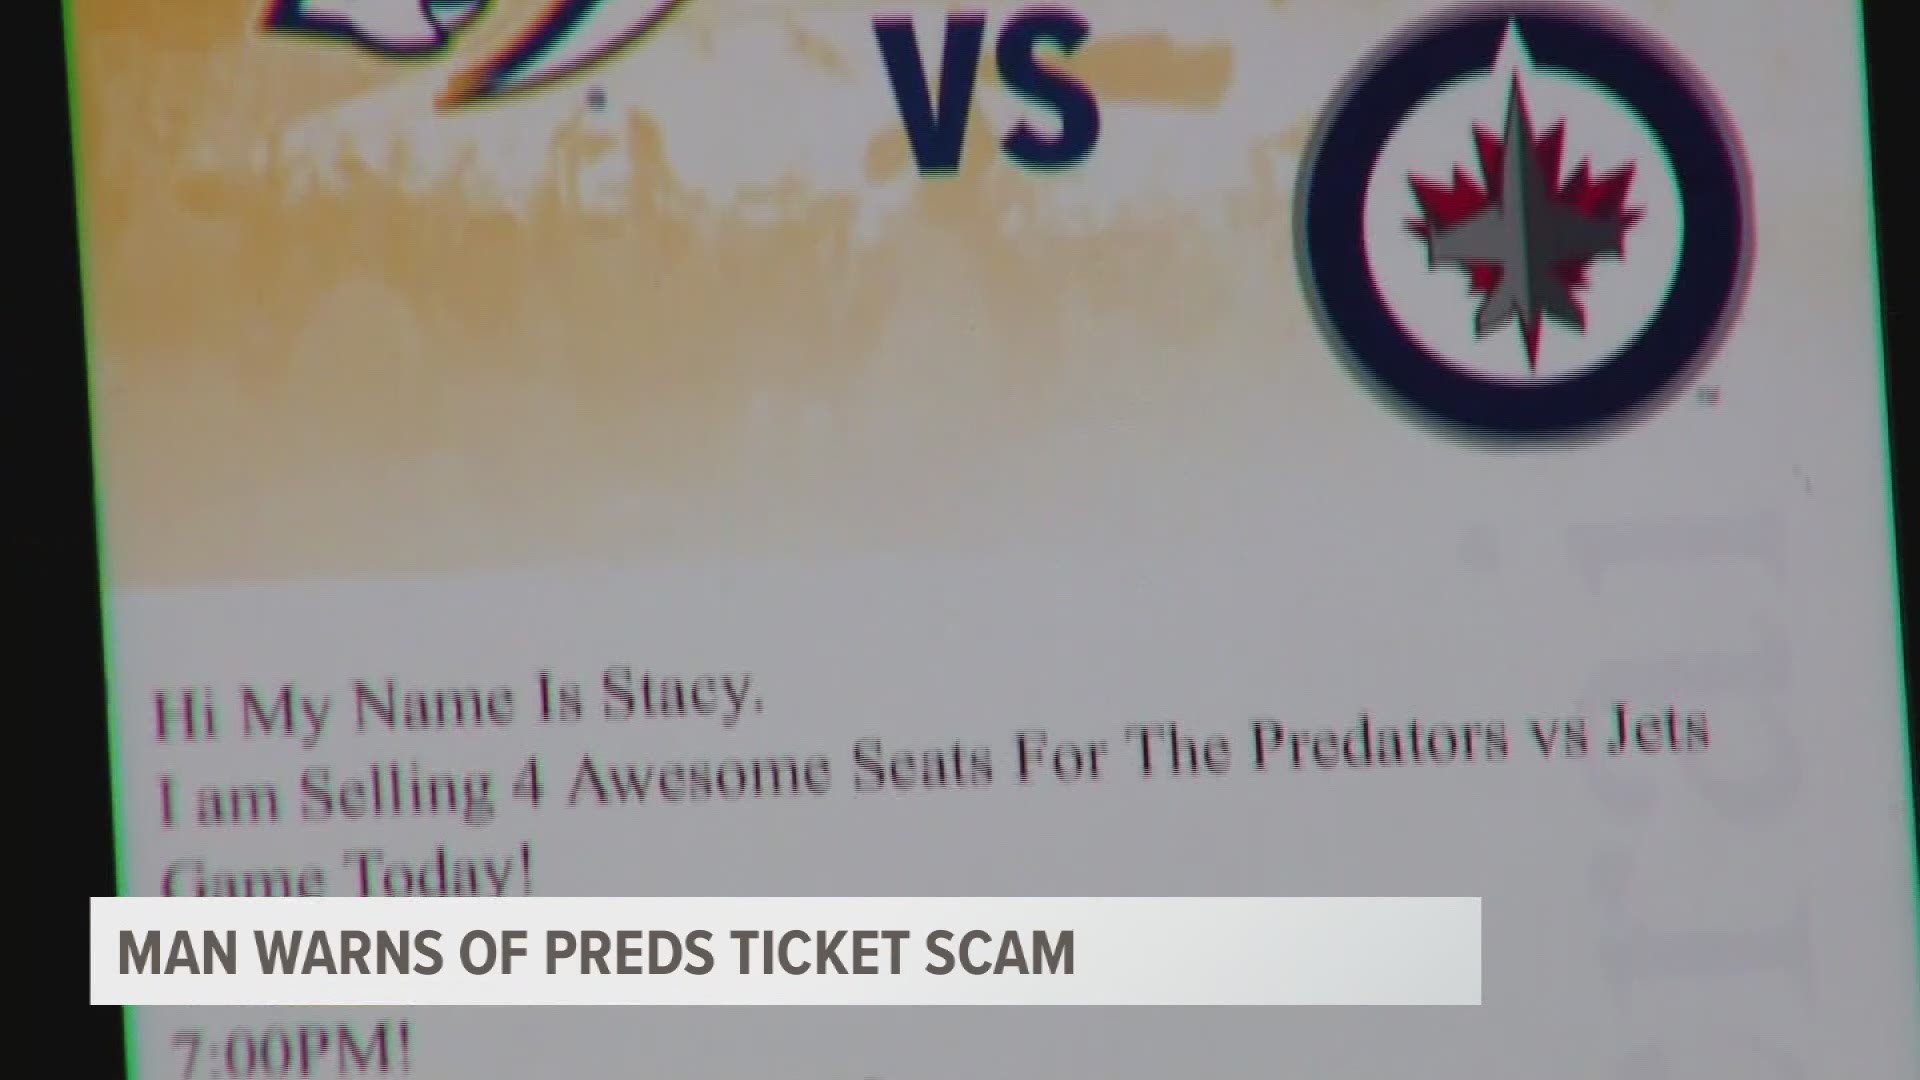 A Nashville Predators fan is sending a message to Preds to be wary of fake tickets.